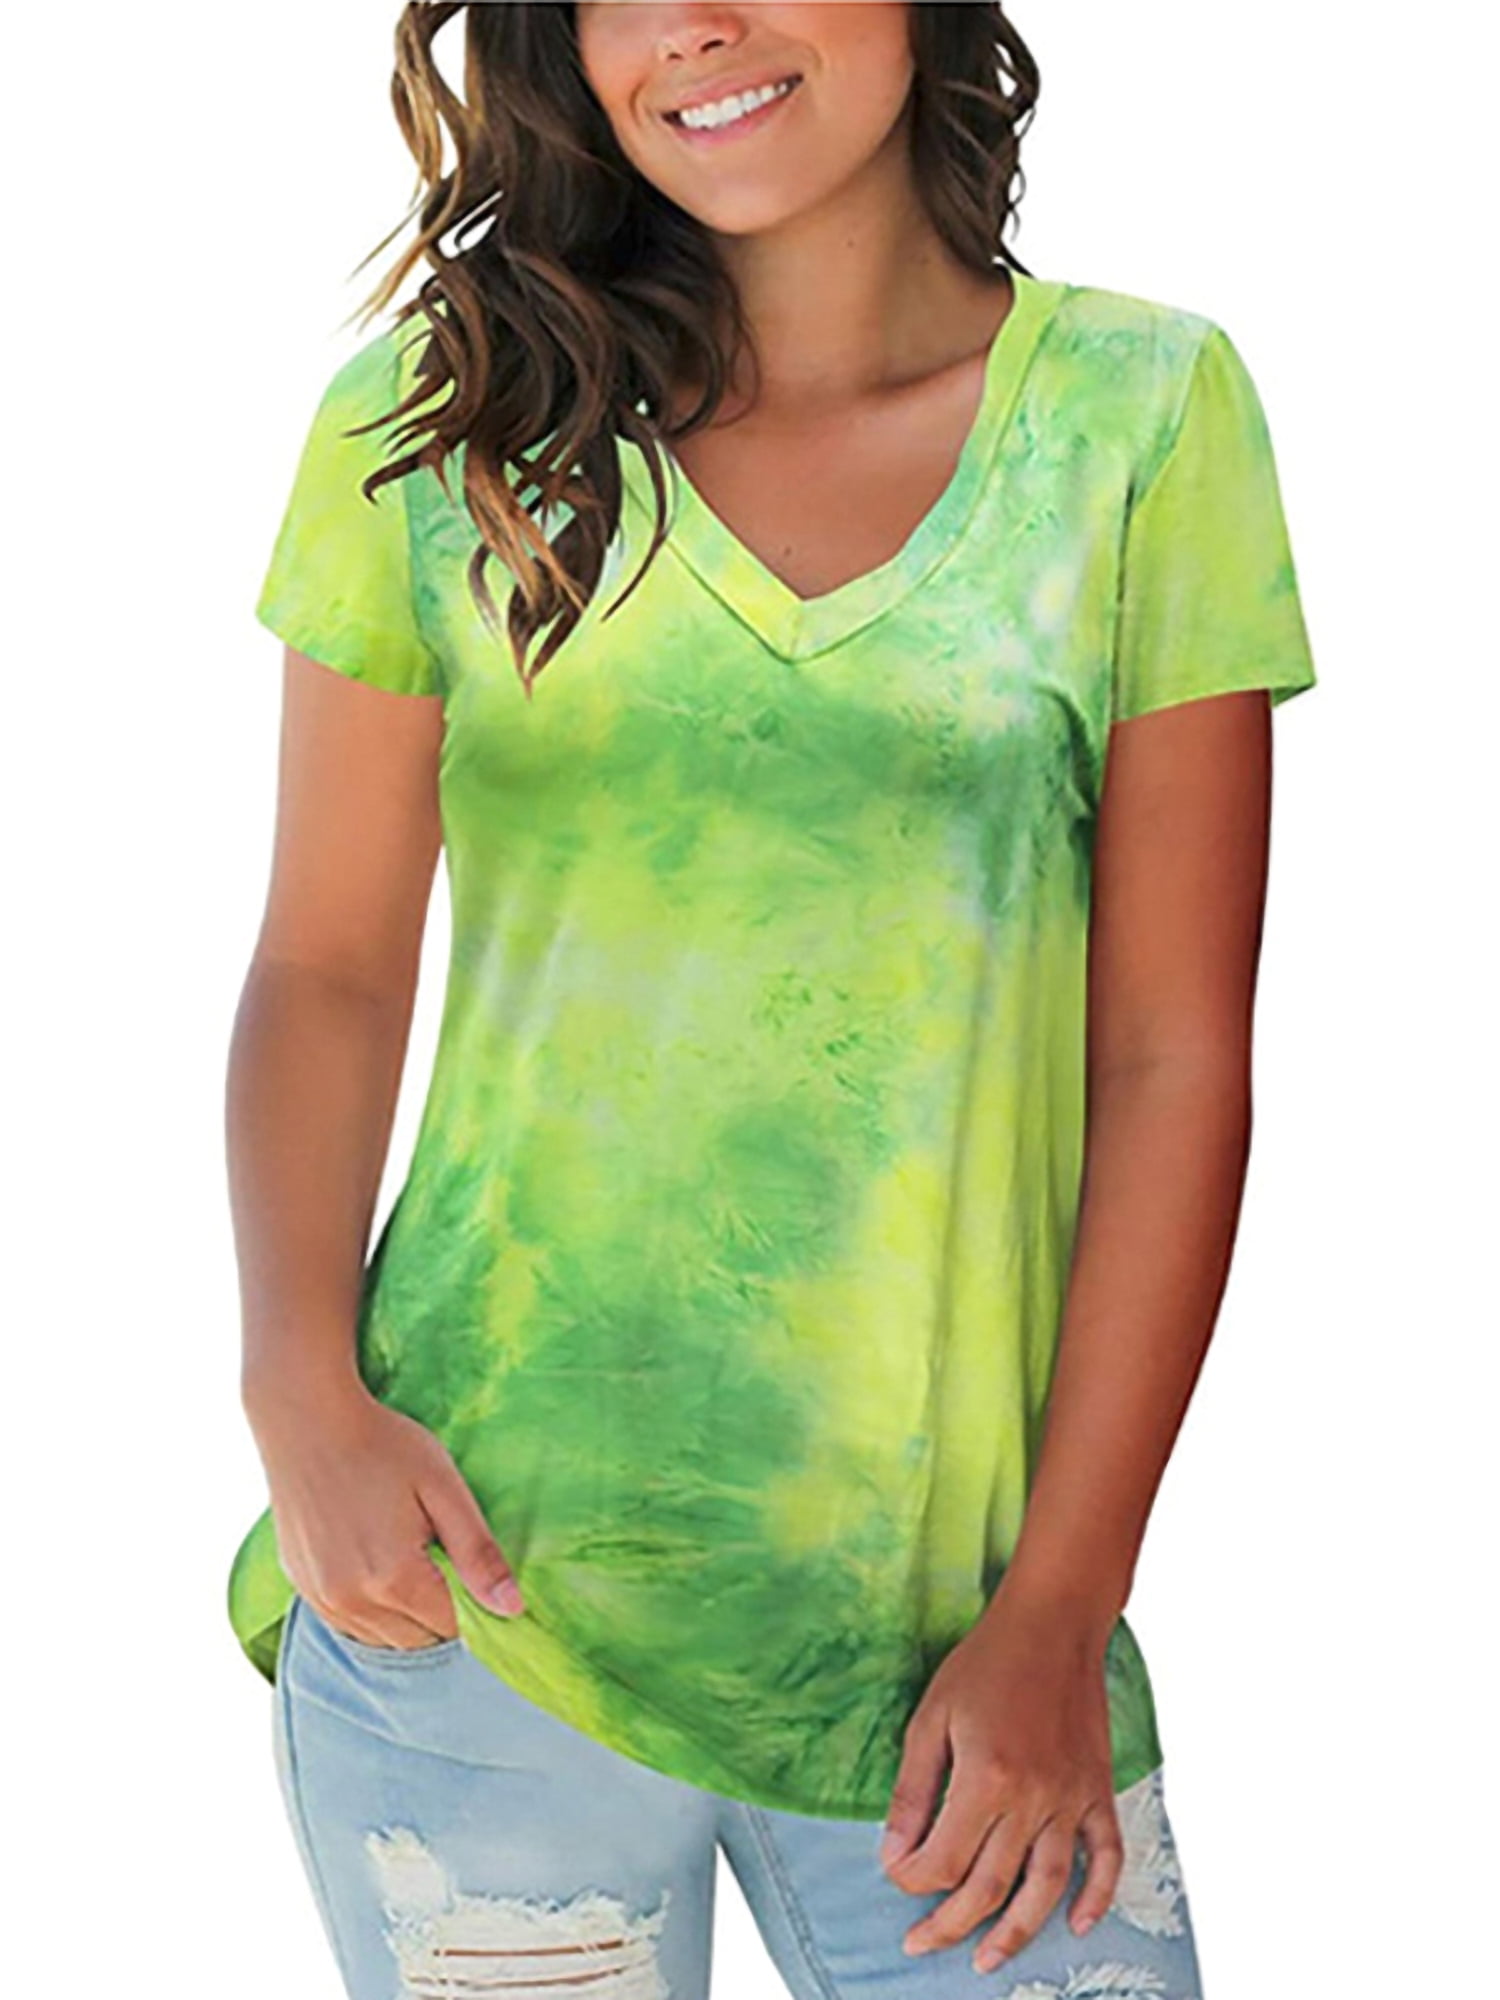 Cbcbtwo Summer Soild Color Tunic Tops For Women 2022 Casual Tie Dyed T Shirts Short Sleeve Crewneck Flowy Blouse Comfy Tees 